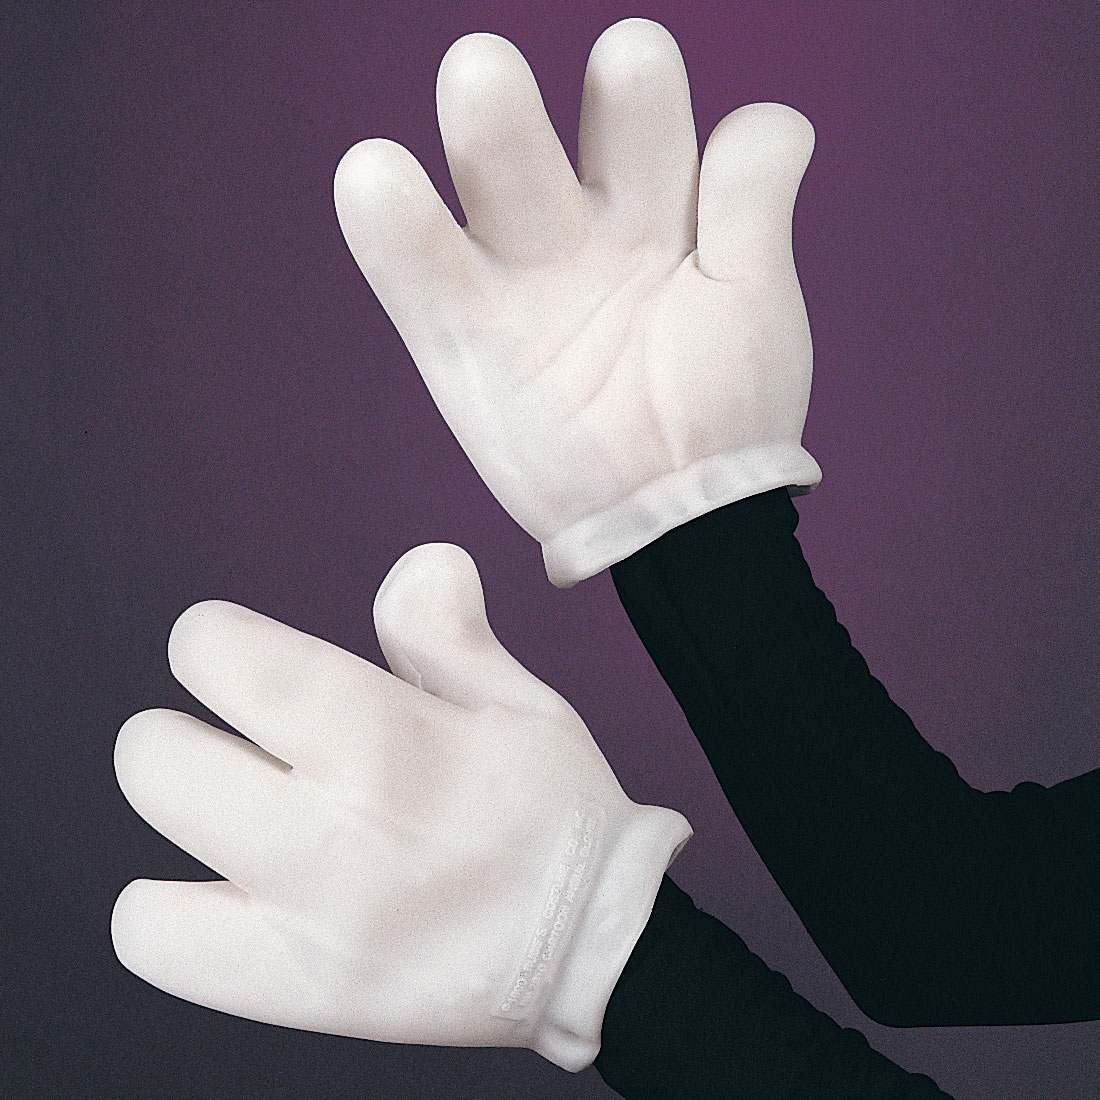 2 Pairs White Five Fingers Jumbo Cartoon Hands White Cartoon Costume Gloves for Role Playing Halloween Party Small